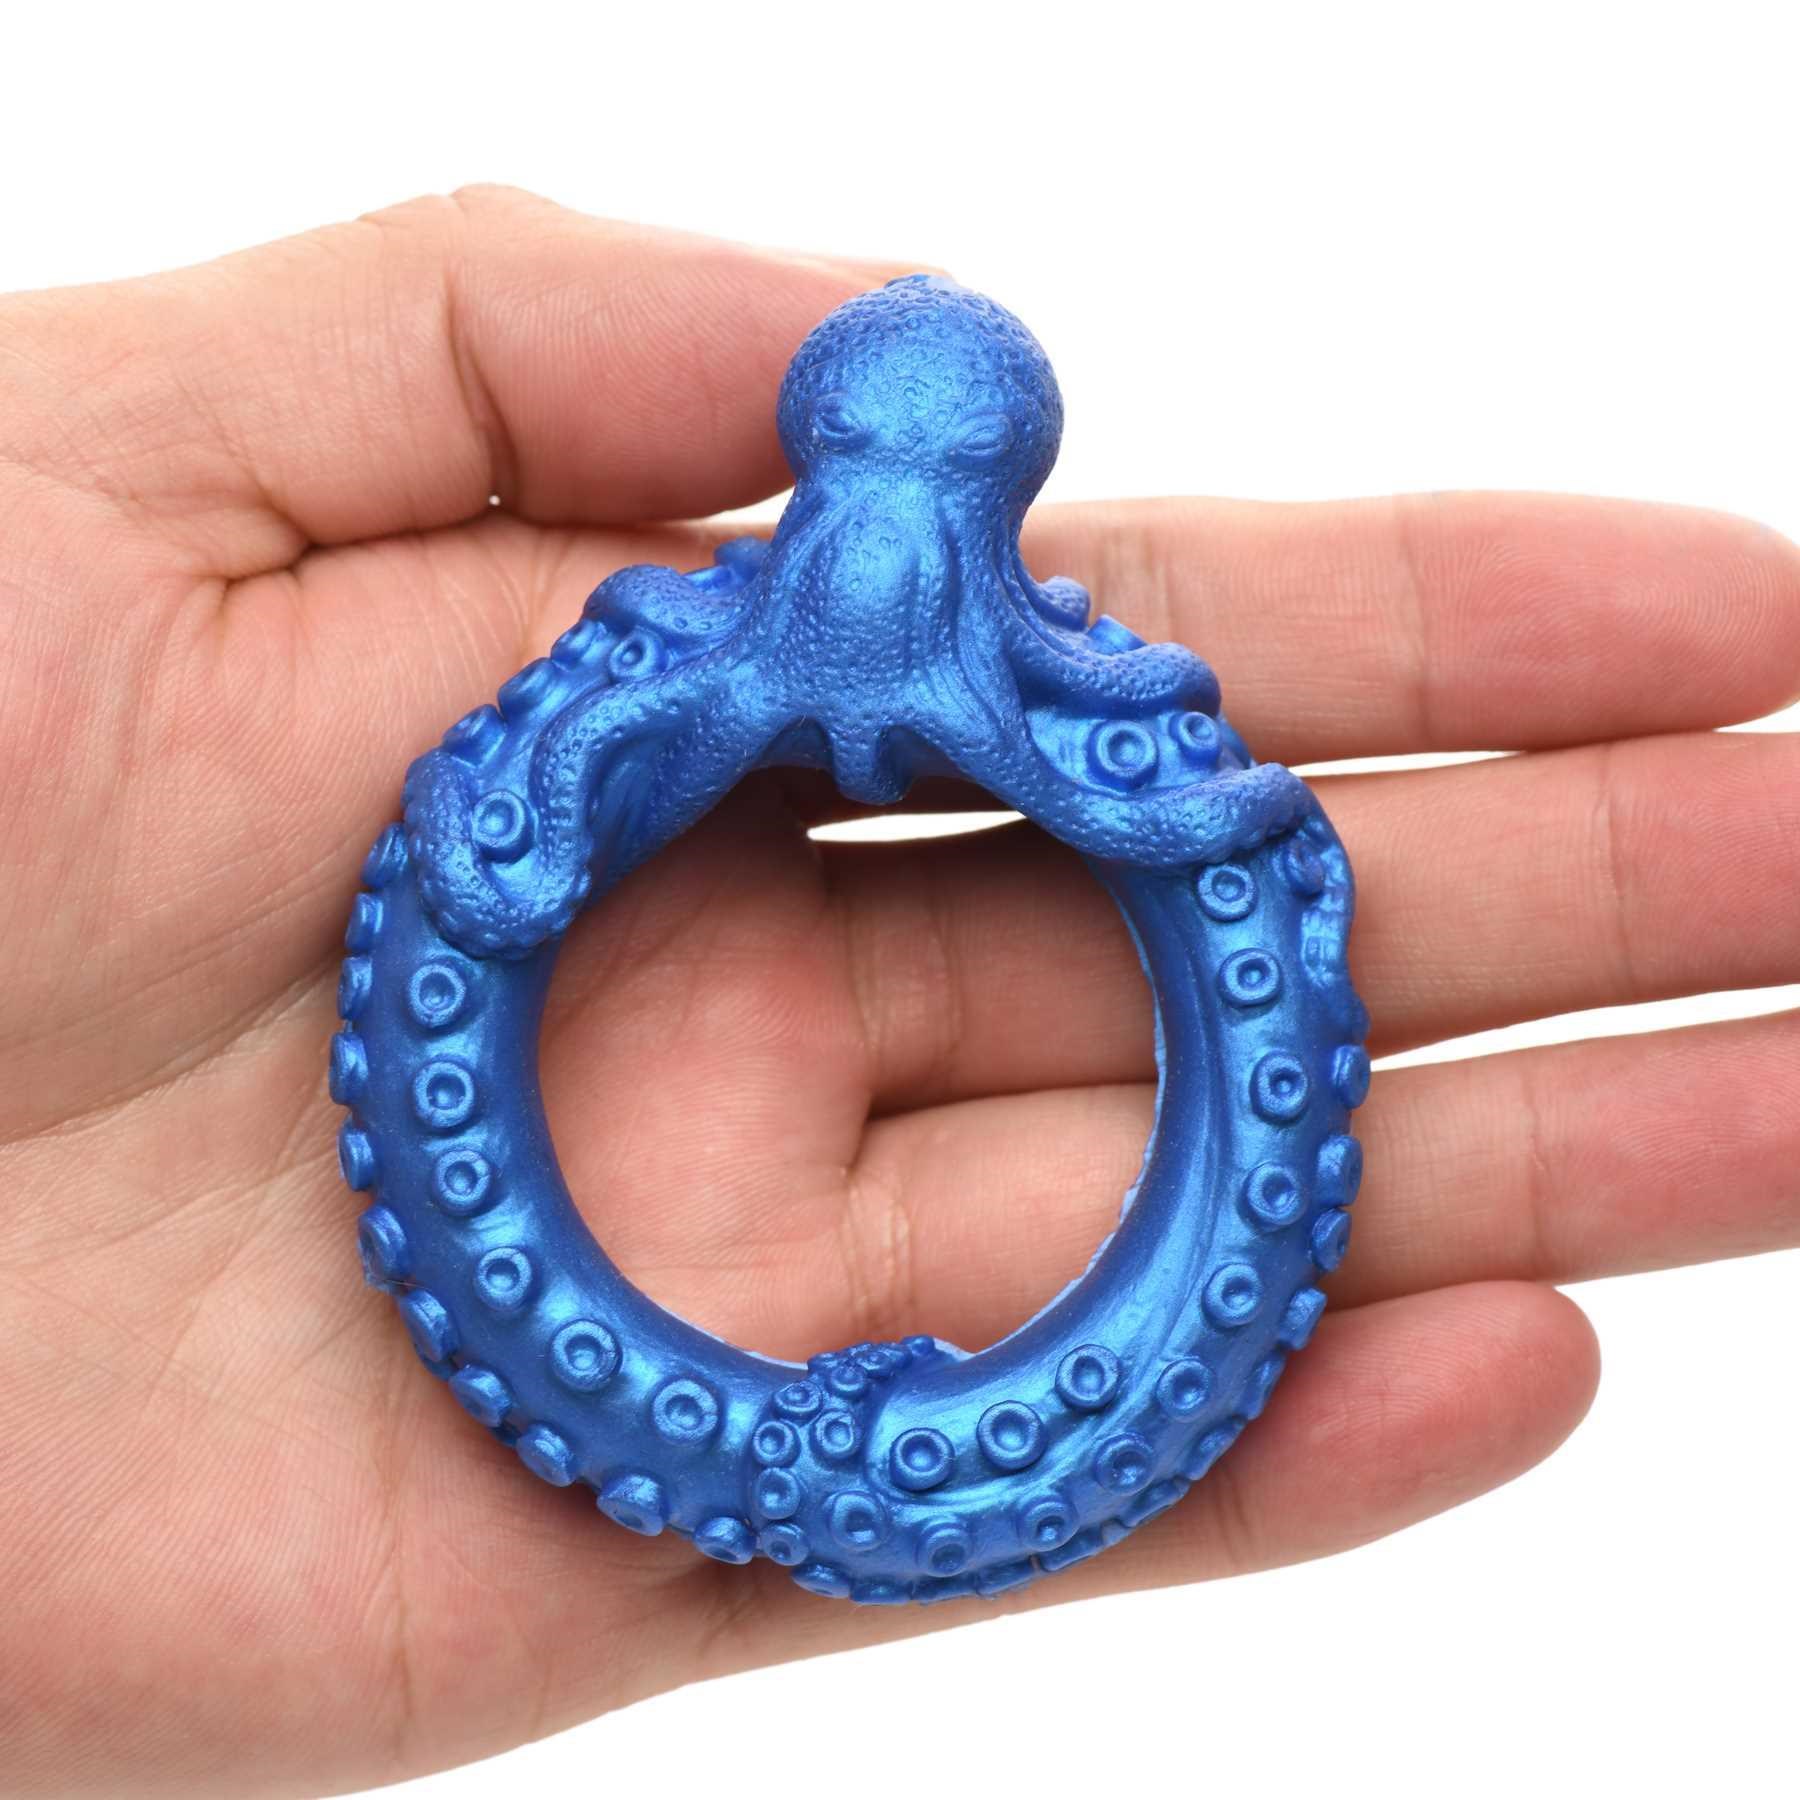 Creature Cocks Poseidon's Octo-Ring Silicone Cock Ring laying on a hand